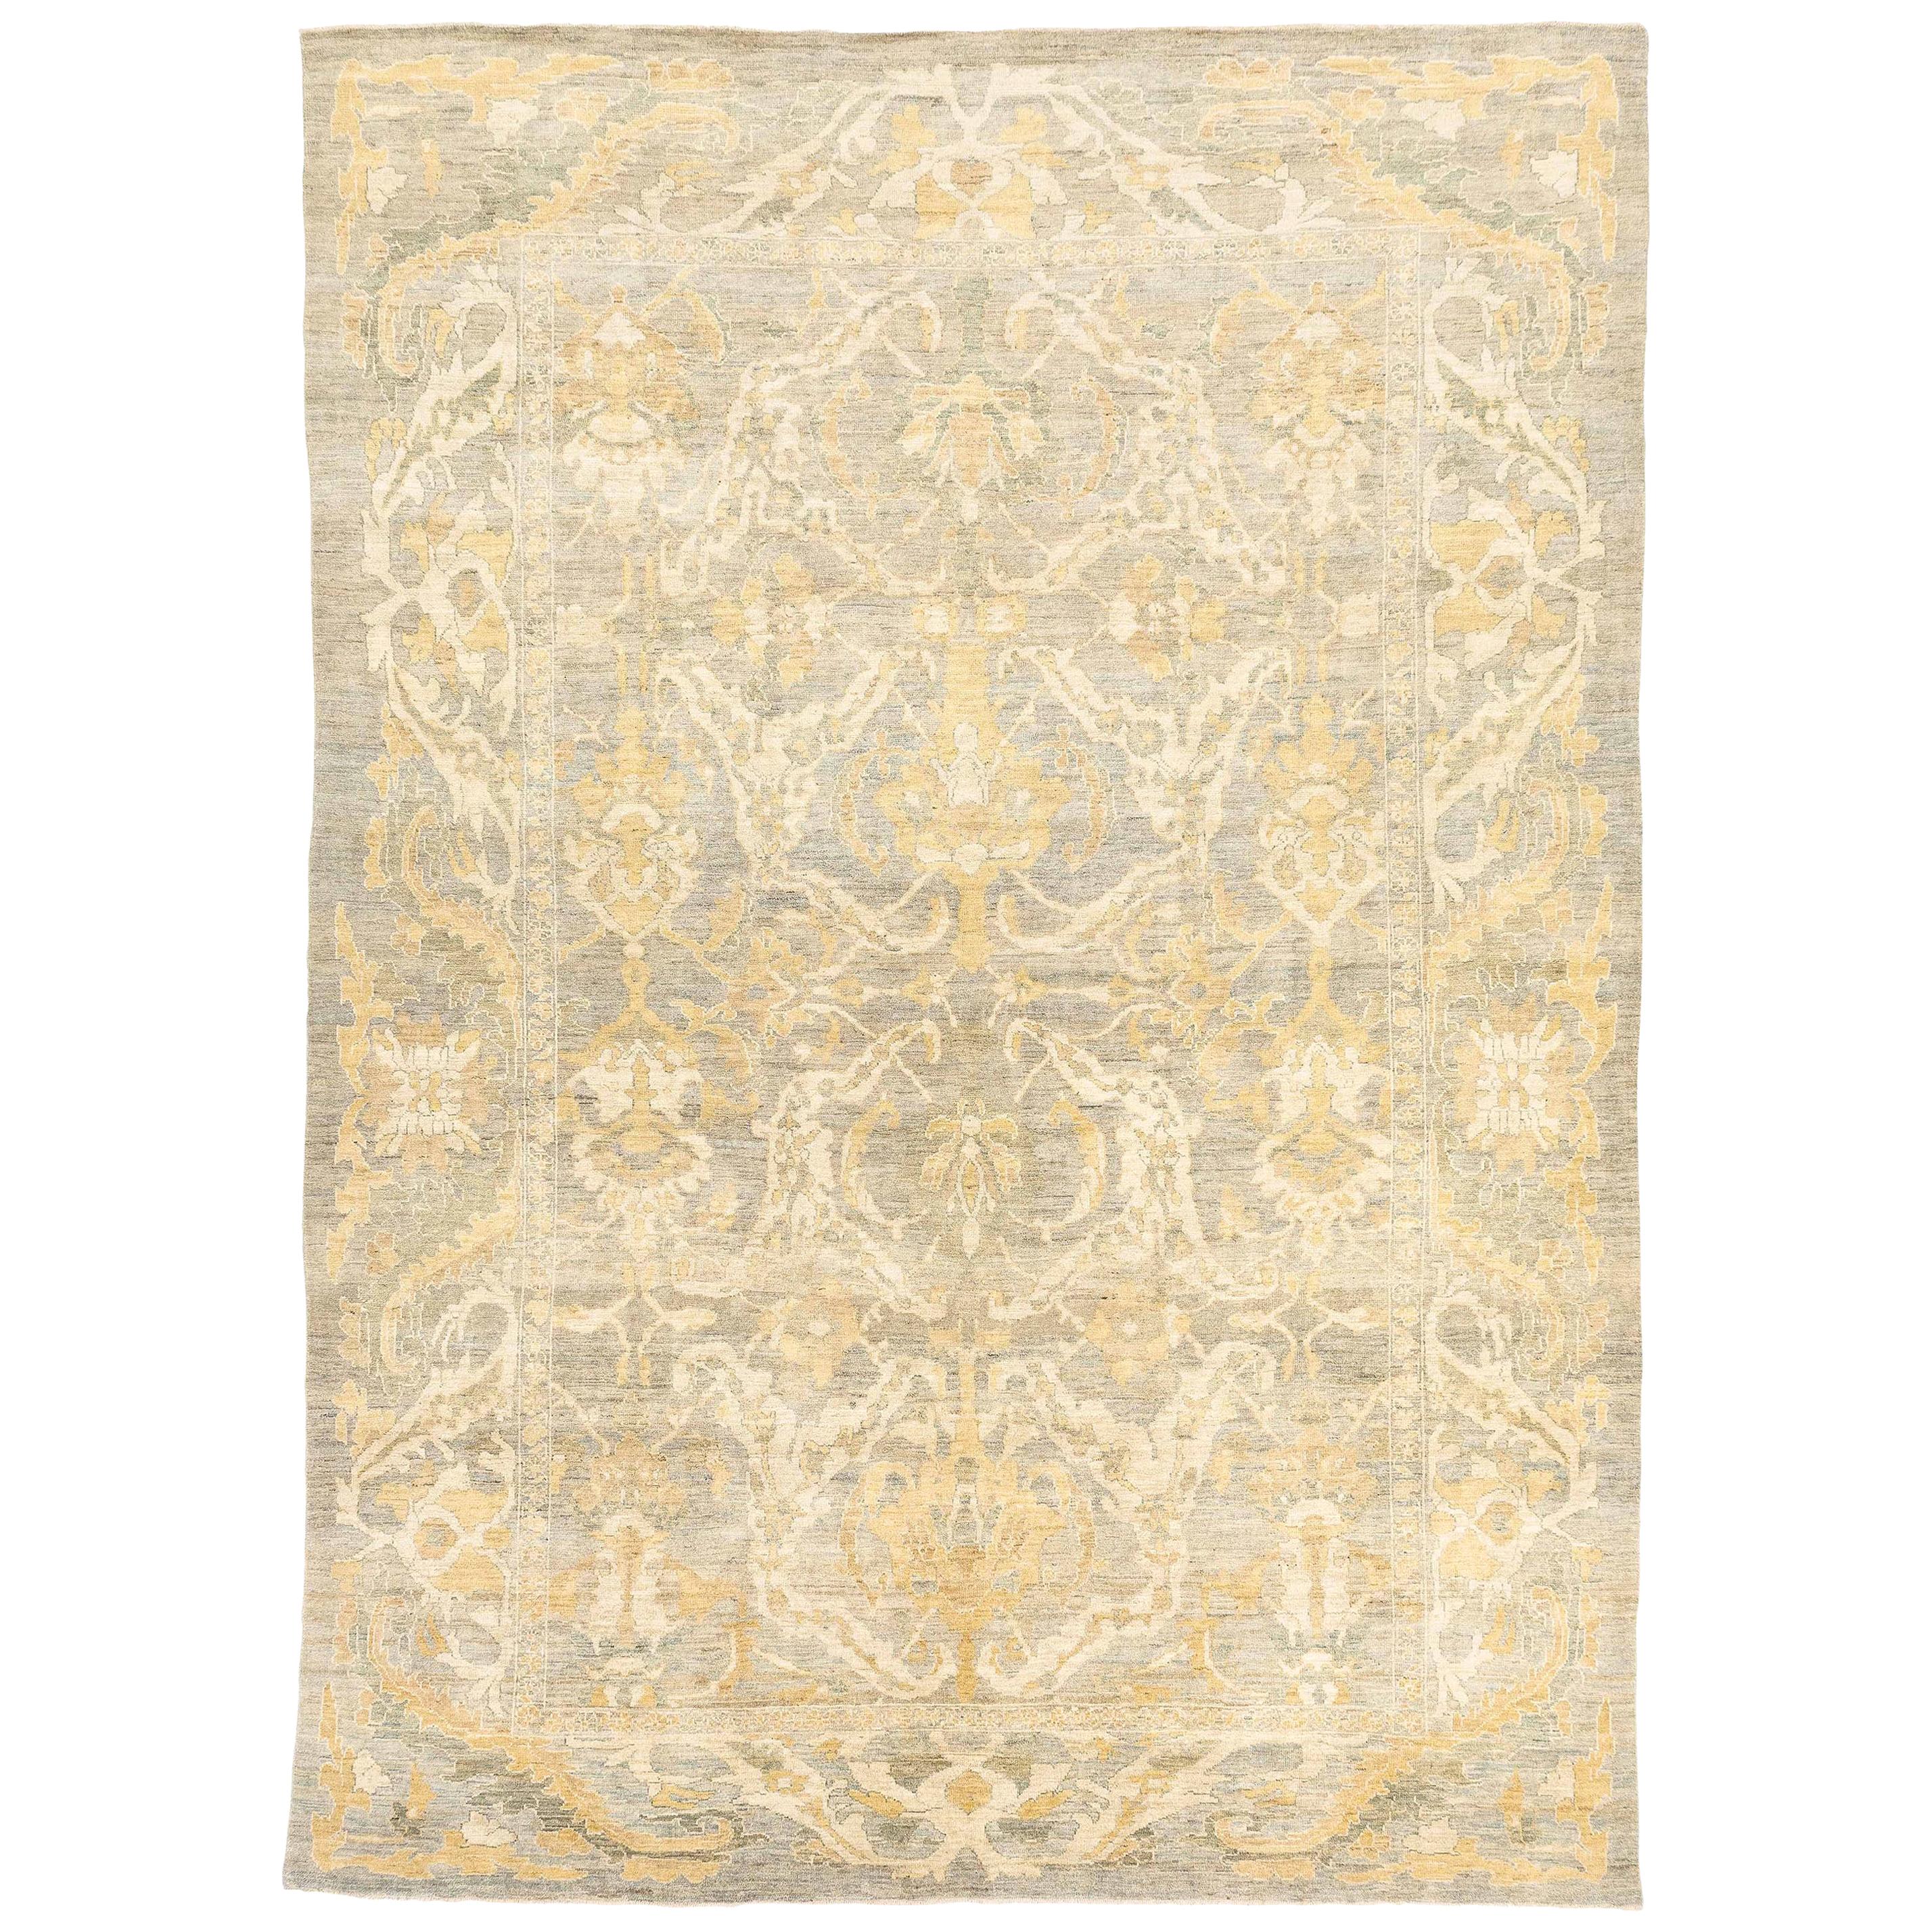 Contemporary Turkish Sultanabad Style Rug with Ivory and Brown Botanical Details